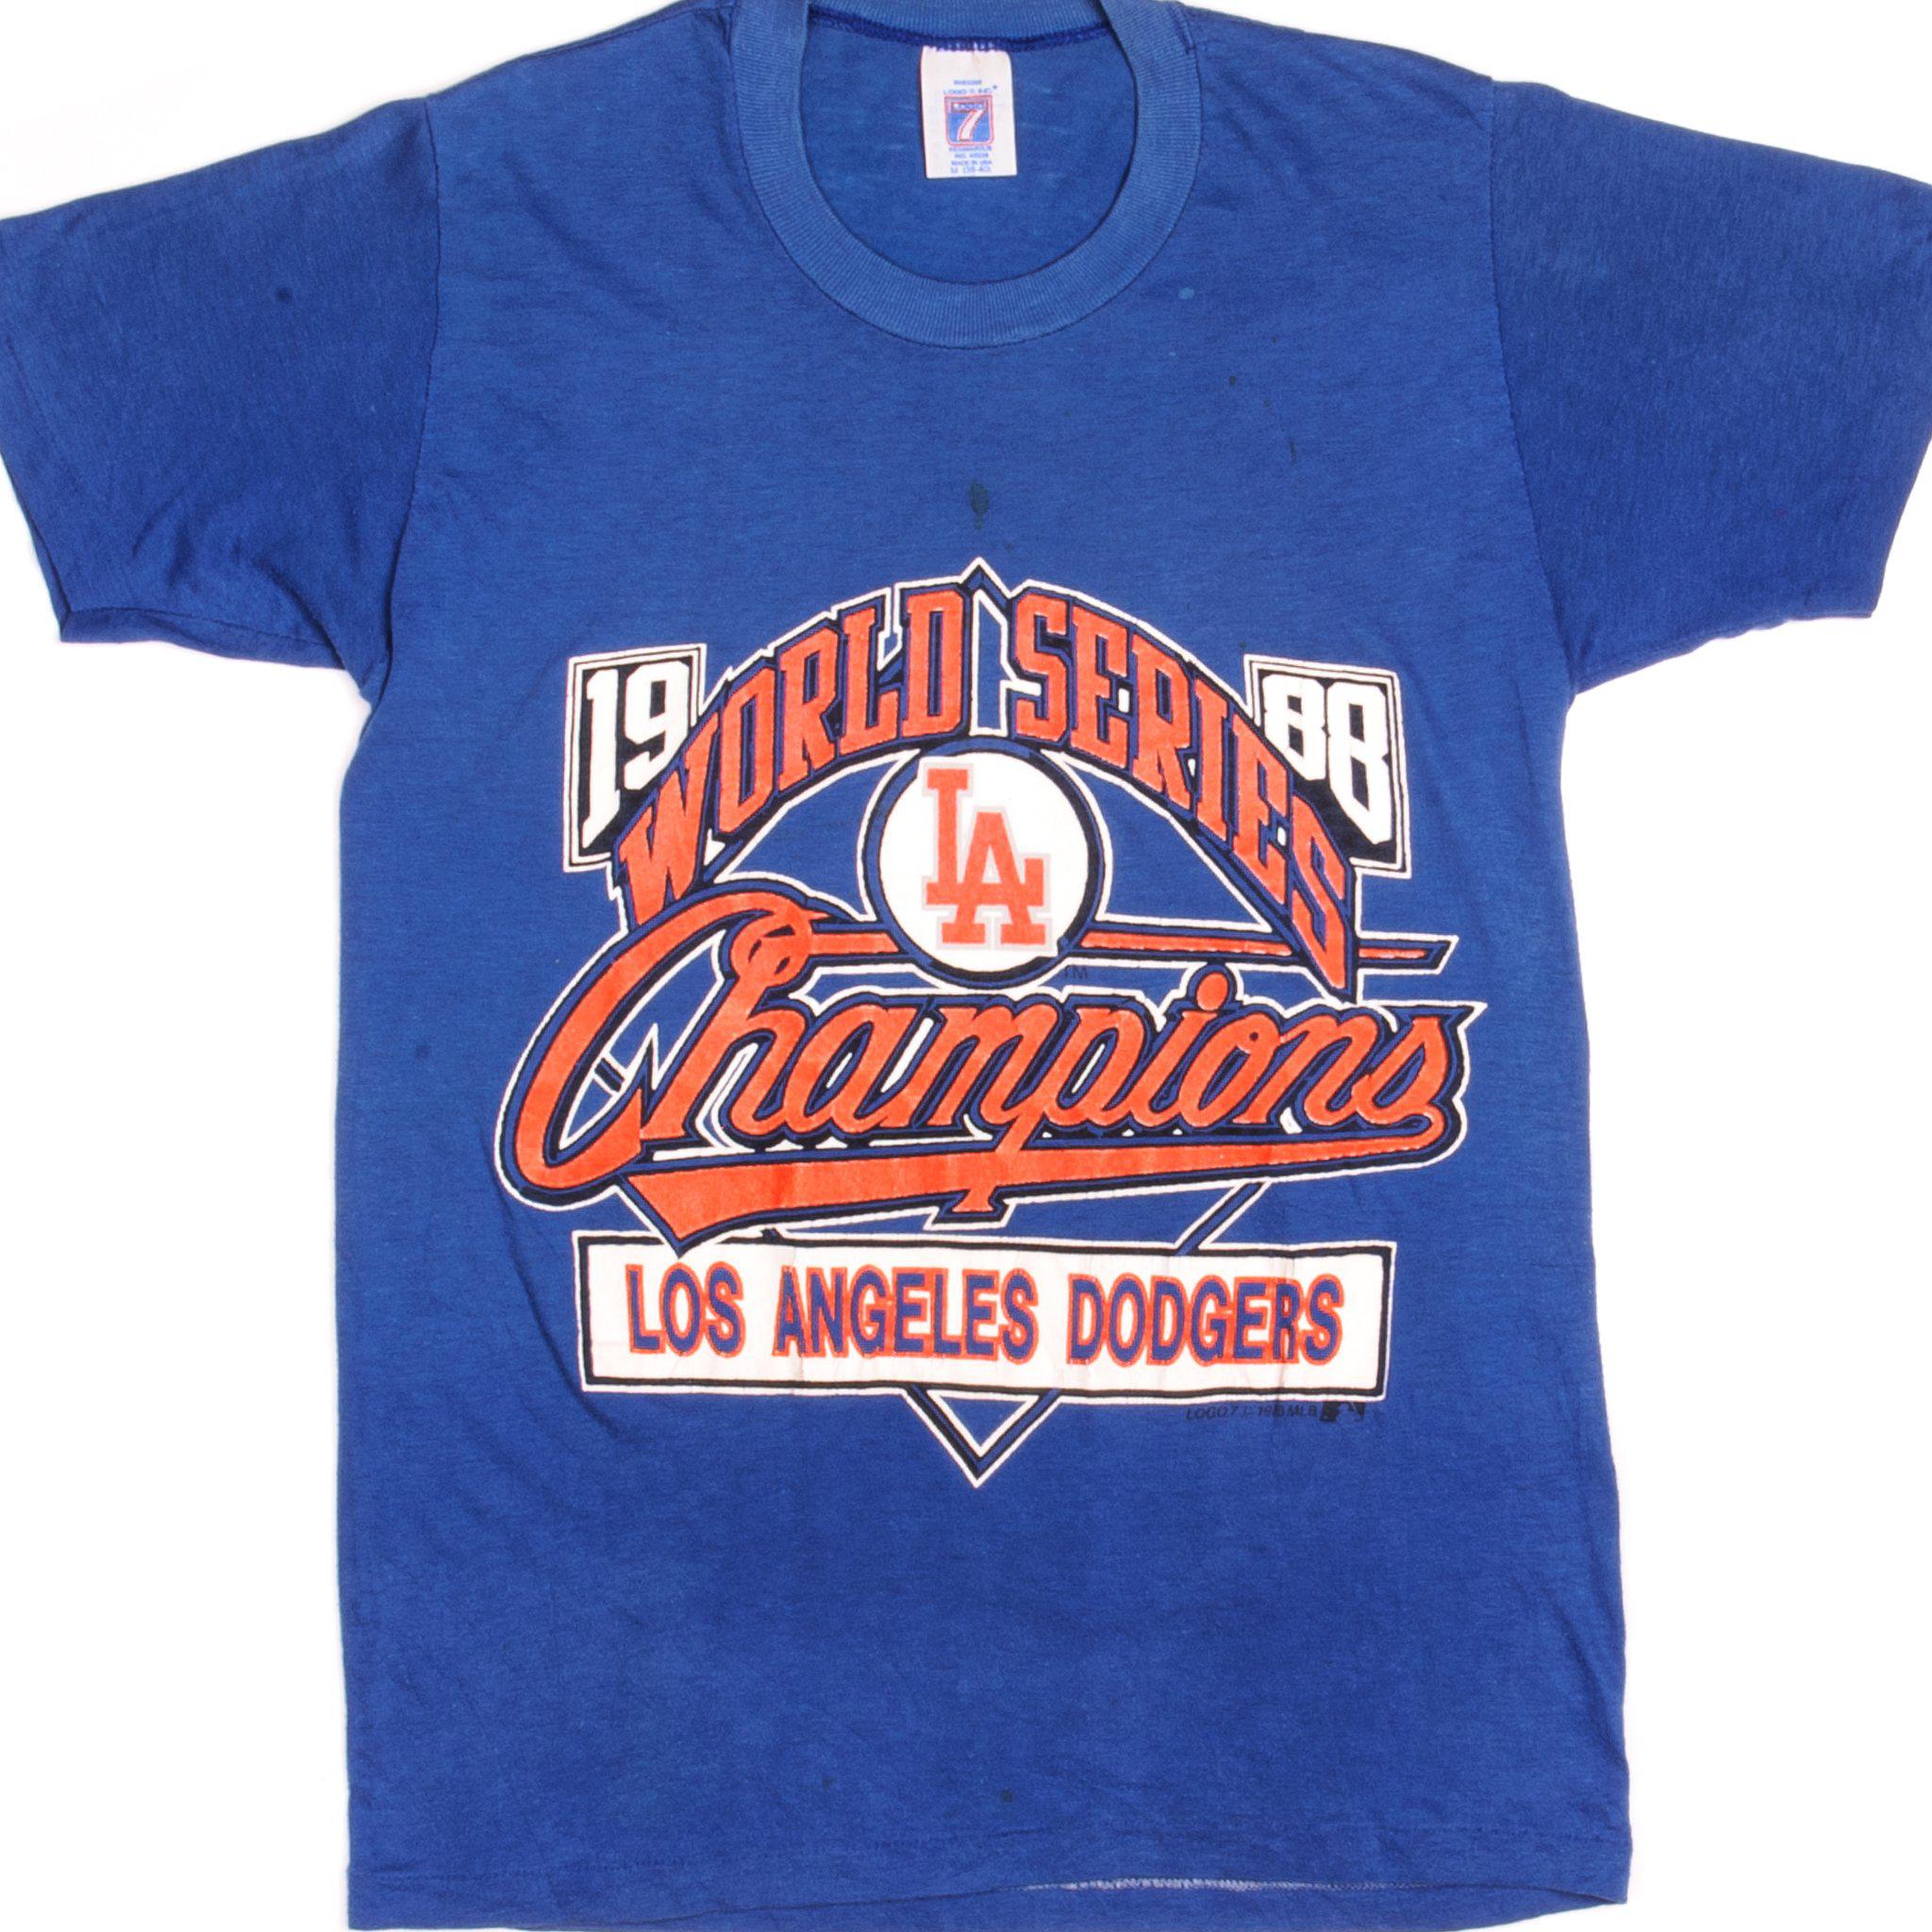 Dodgers World Series Champs 1988 T-Shirt from Homage. | Royal Blue | Vintage Apparel from Homage.